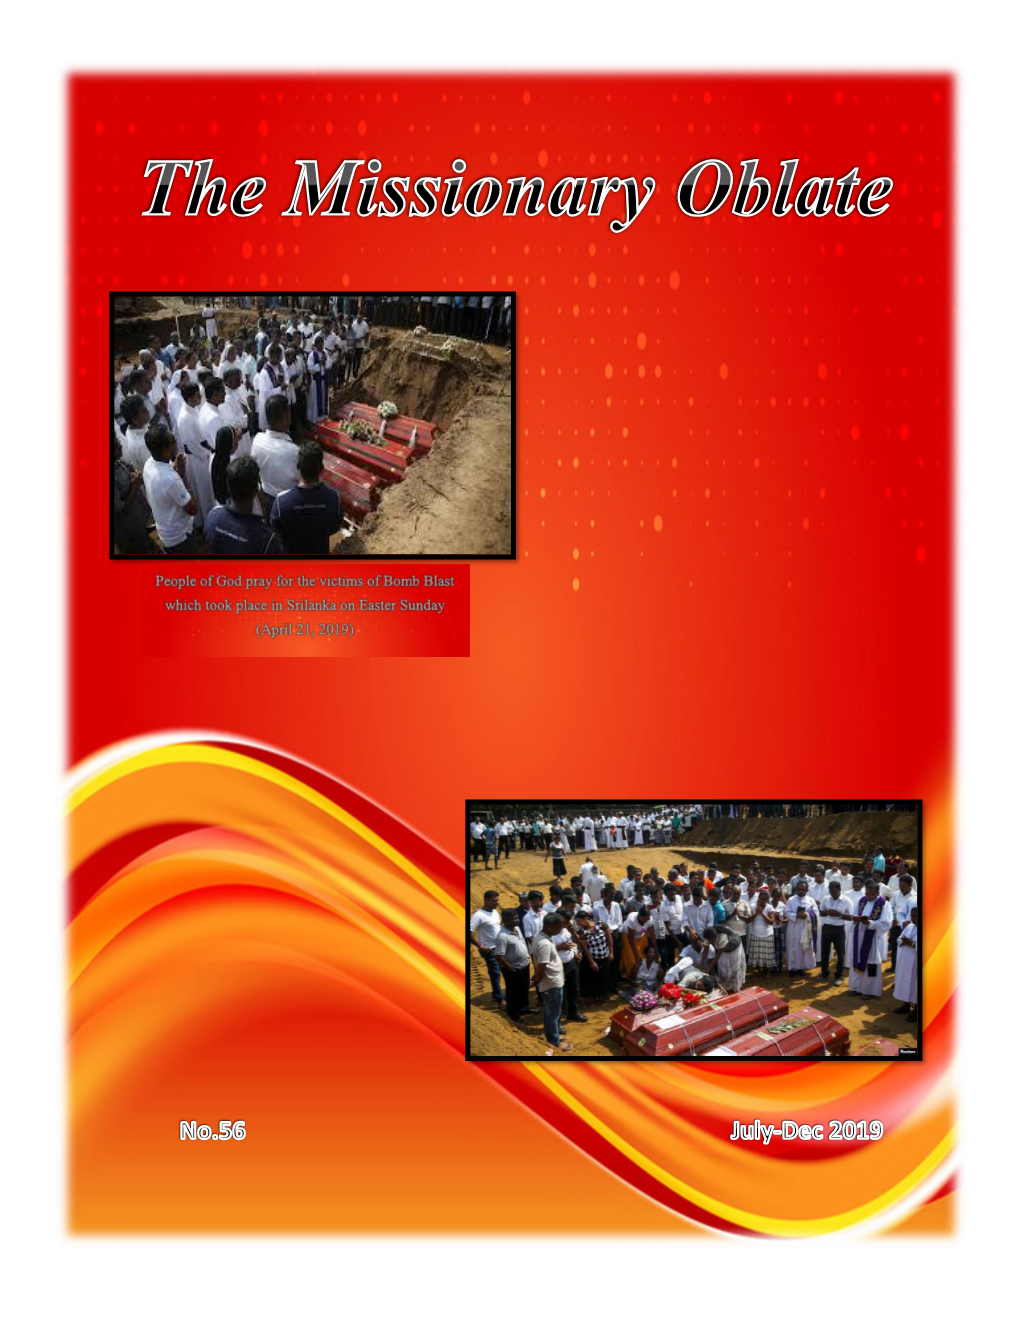 The Missionary Oblate July – Dec., 2019